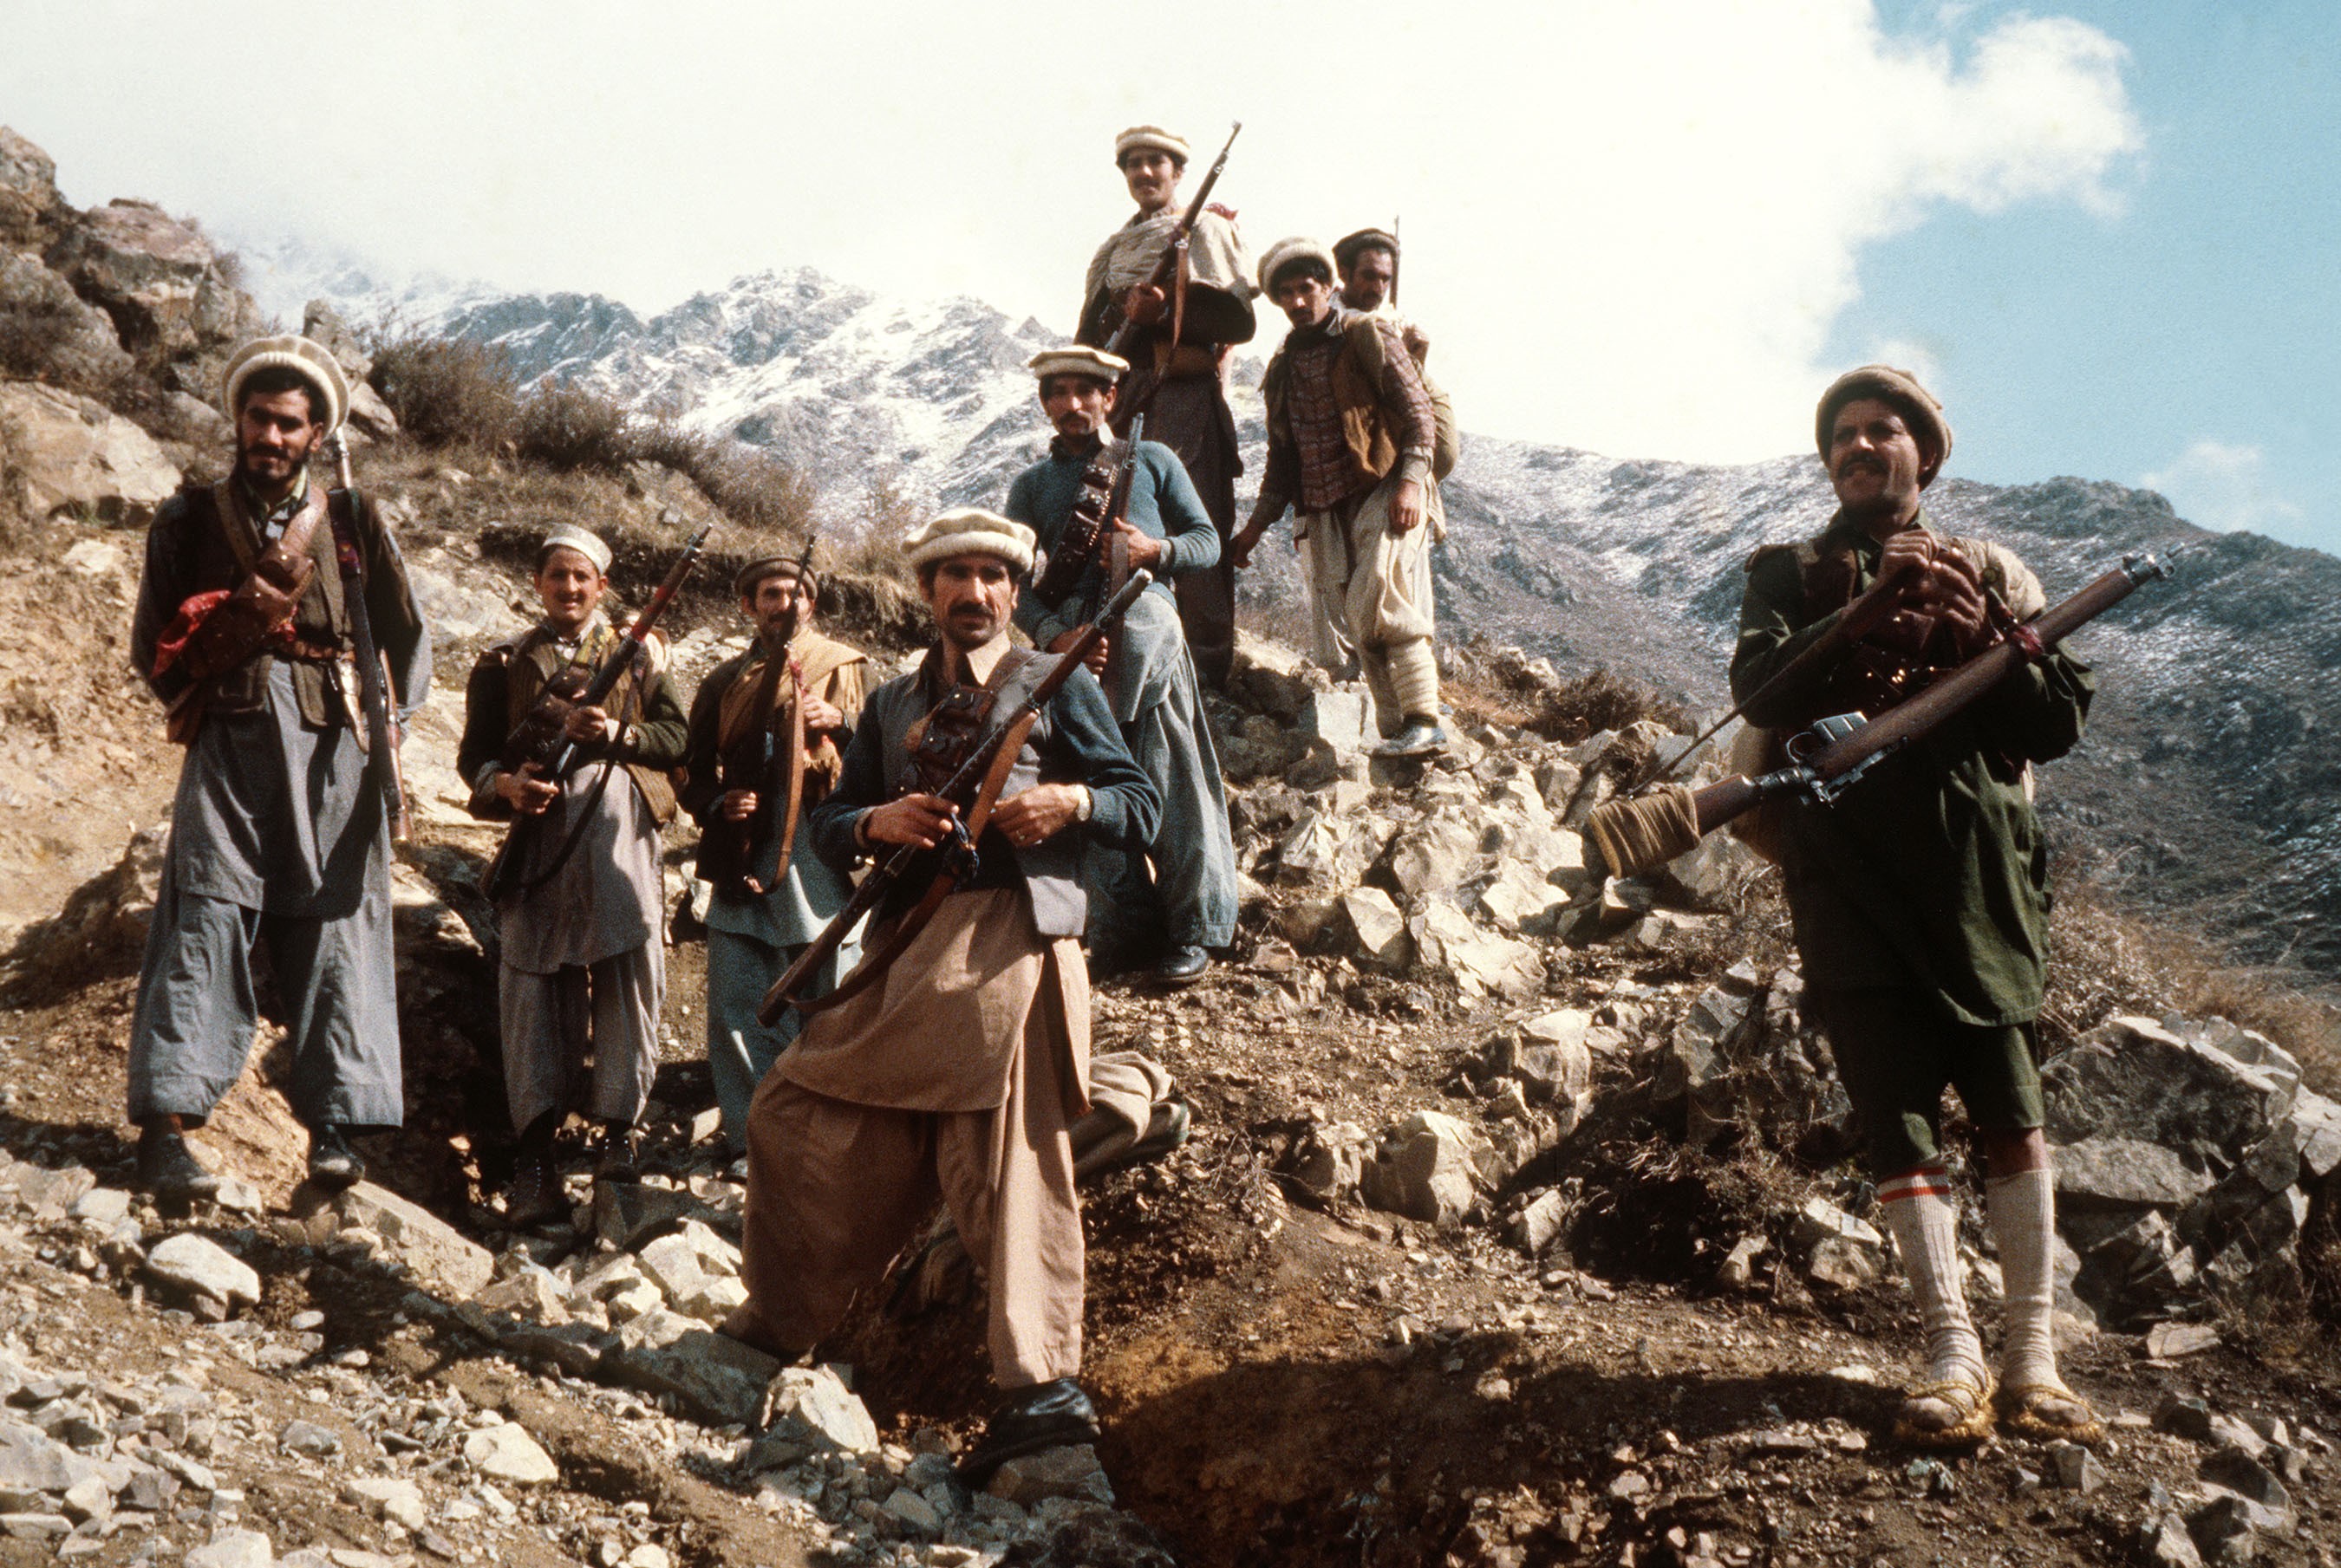 In the early 80s shows the premier groups of the Afghan anti-Soviet resistance fighters with their primitive arms in the eastern parts of the country.